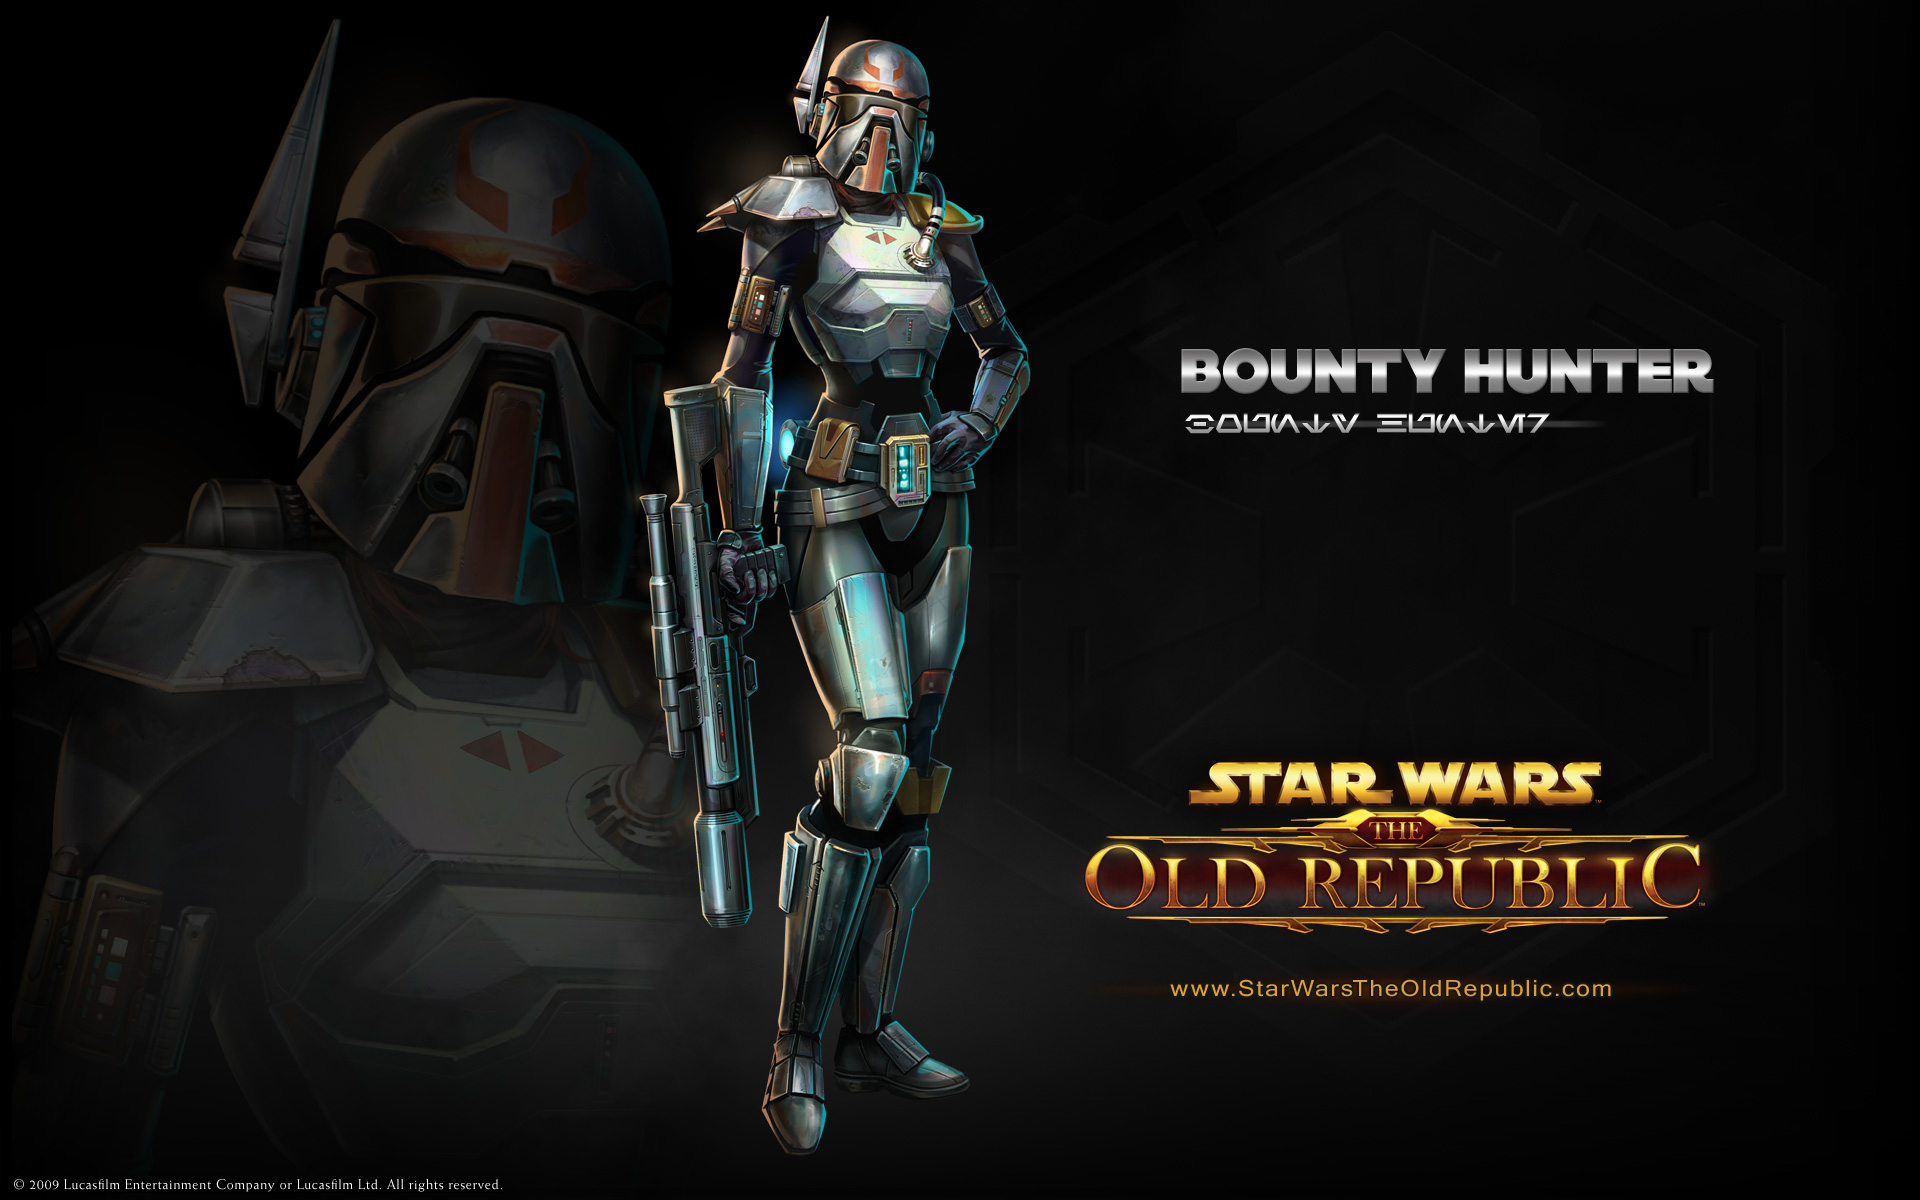 swtor-star-wars-the-old-republic-bounty-hunter-guide